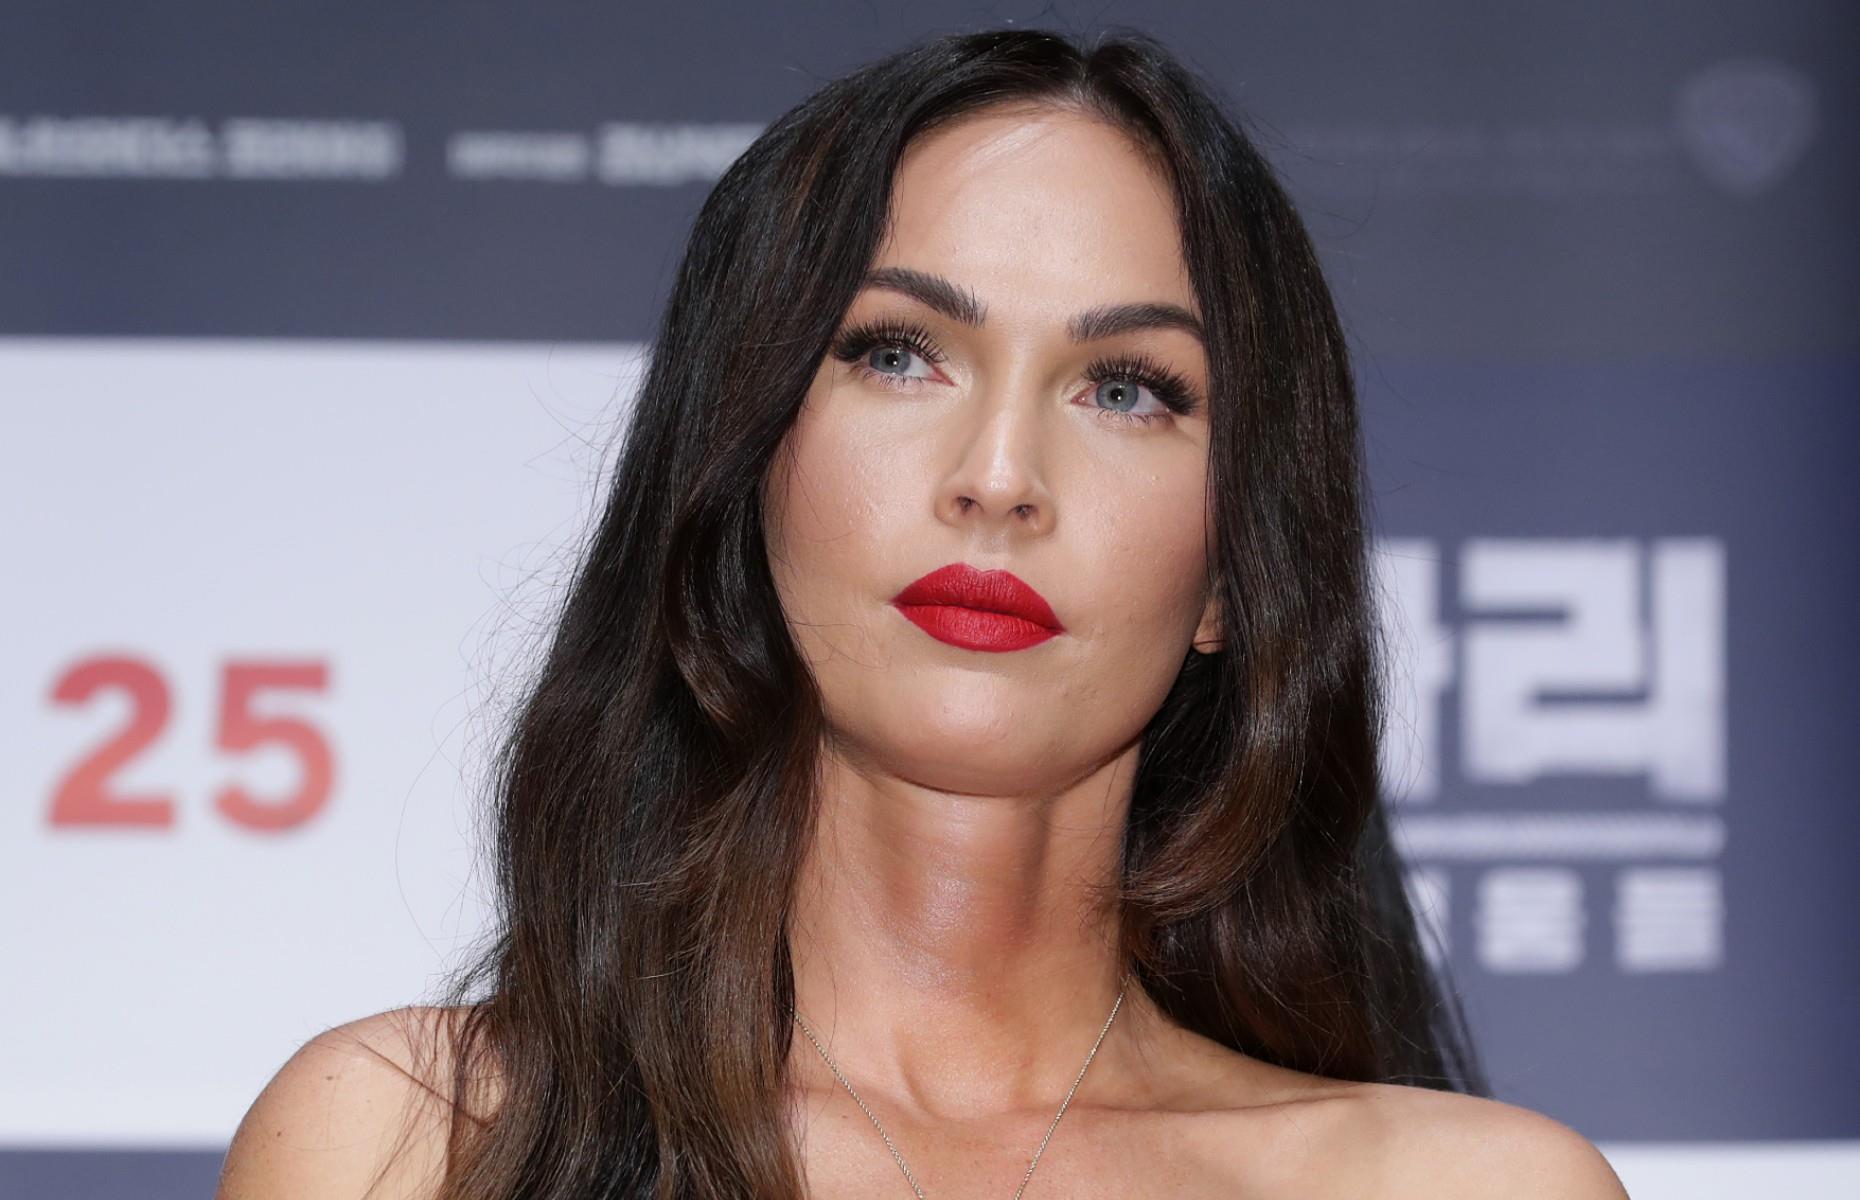 Megan Fox worked at a Tropical Smoothie Cafe